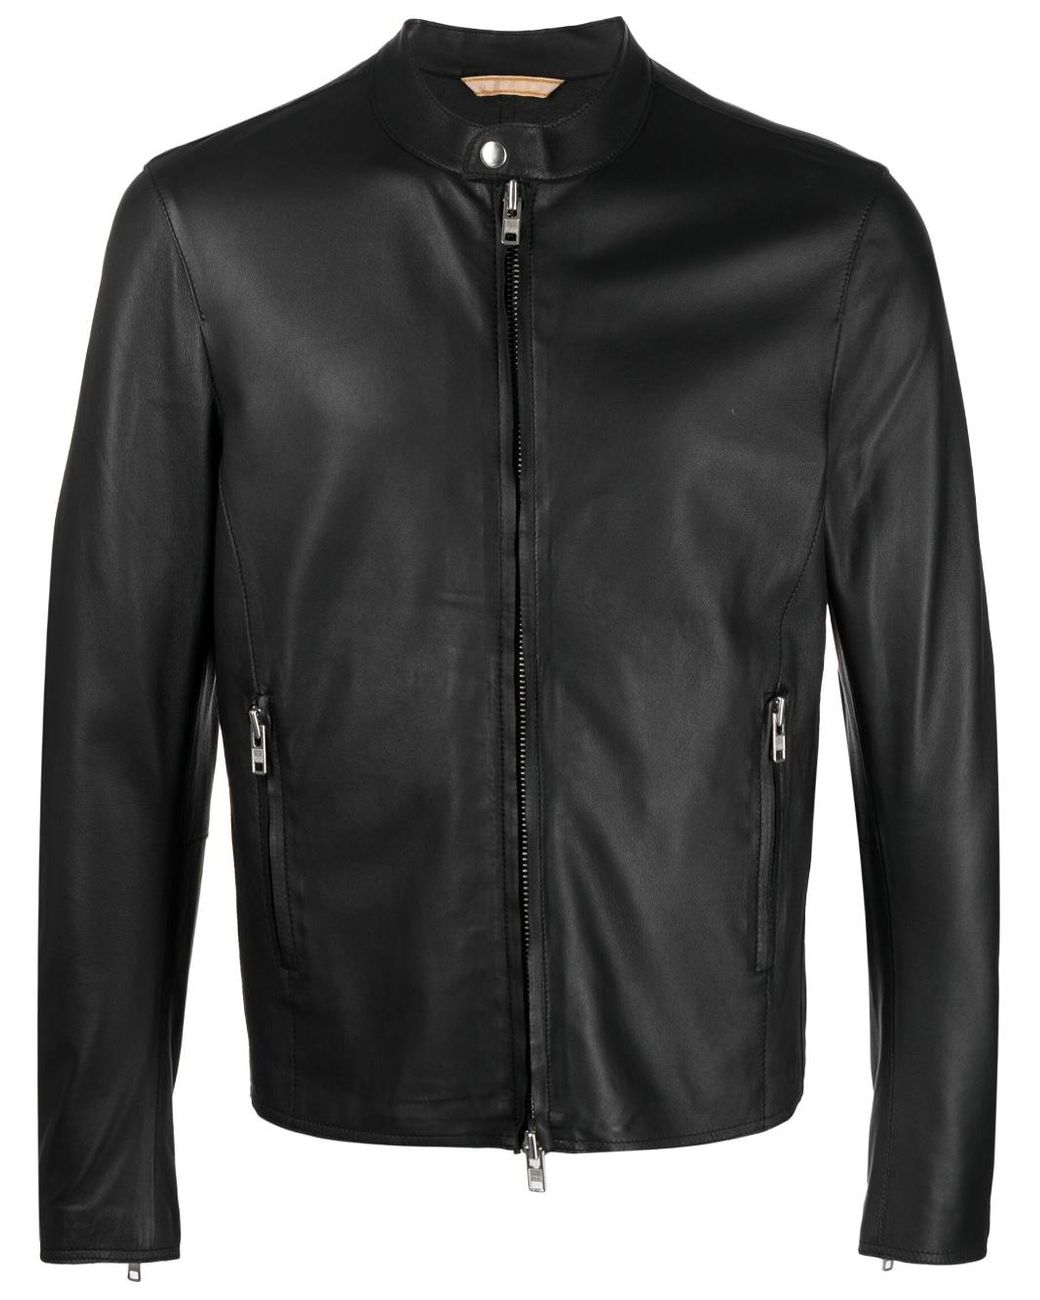 S.w.o.r.d 6.6.44 Plain Leather Jacket in Black for Men | Lyst